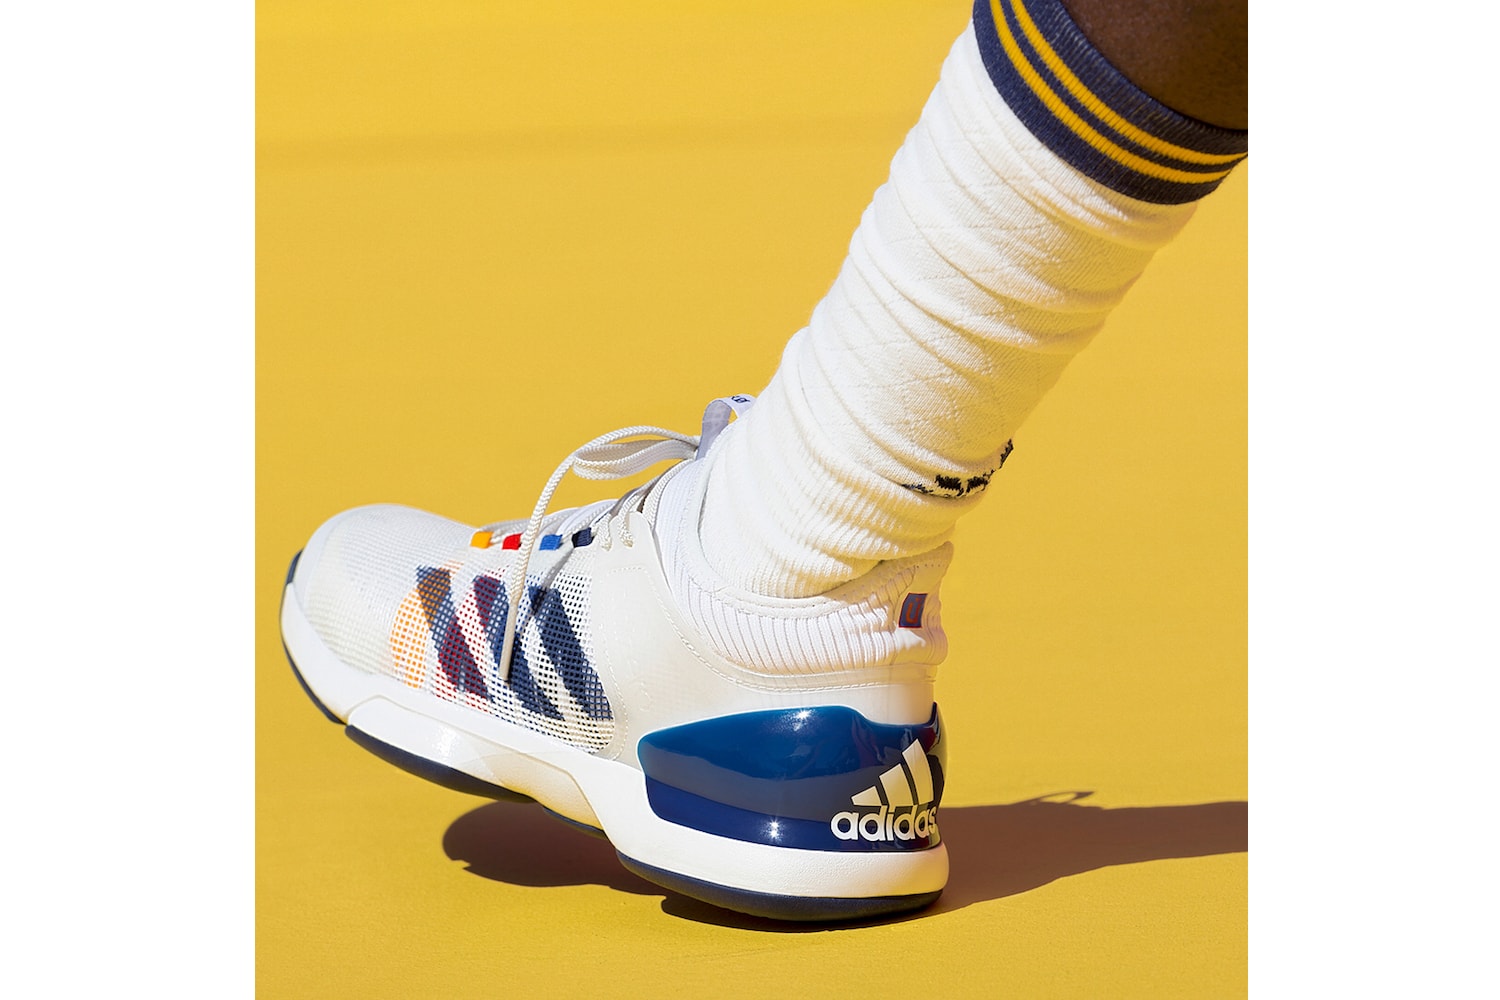 adidas Originals by Pharrell Williams Tennis Collection